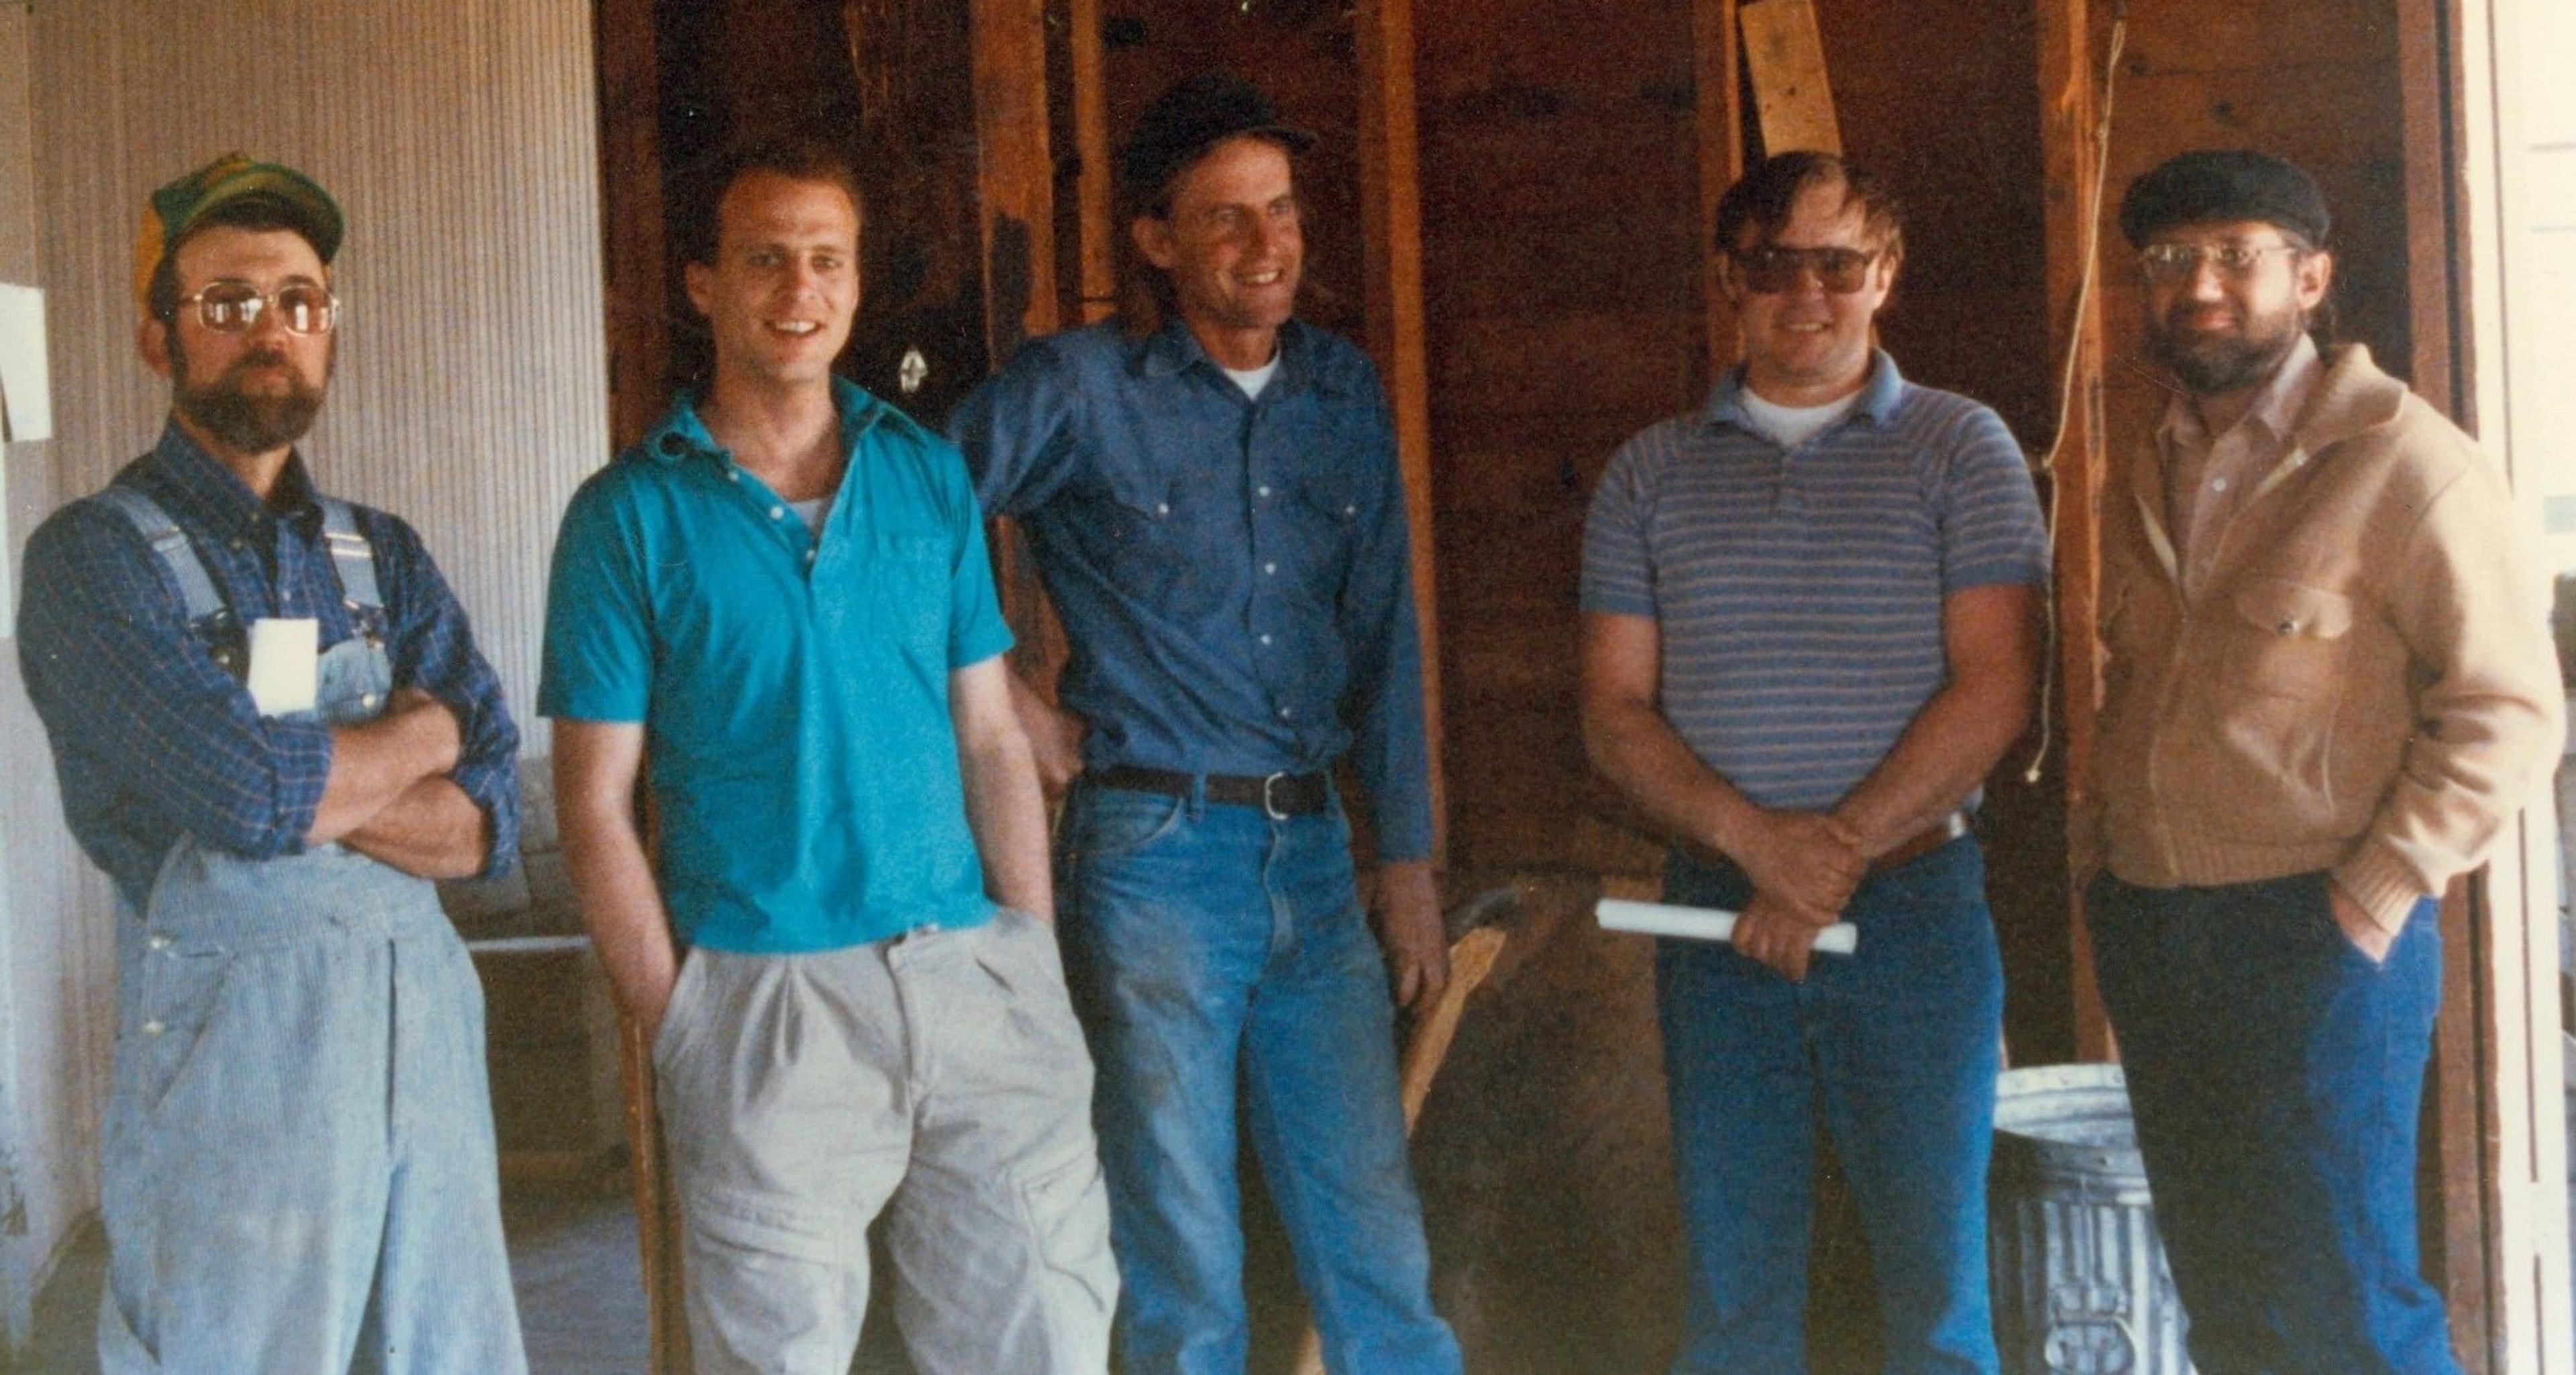 Organic Valley founders Jim Wedeberg, Greg Welch, George Siemon and Spark Burmaster talk to a man (second from right) about purchasing a building in the early days of the co-op.